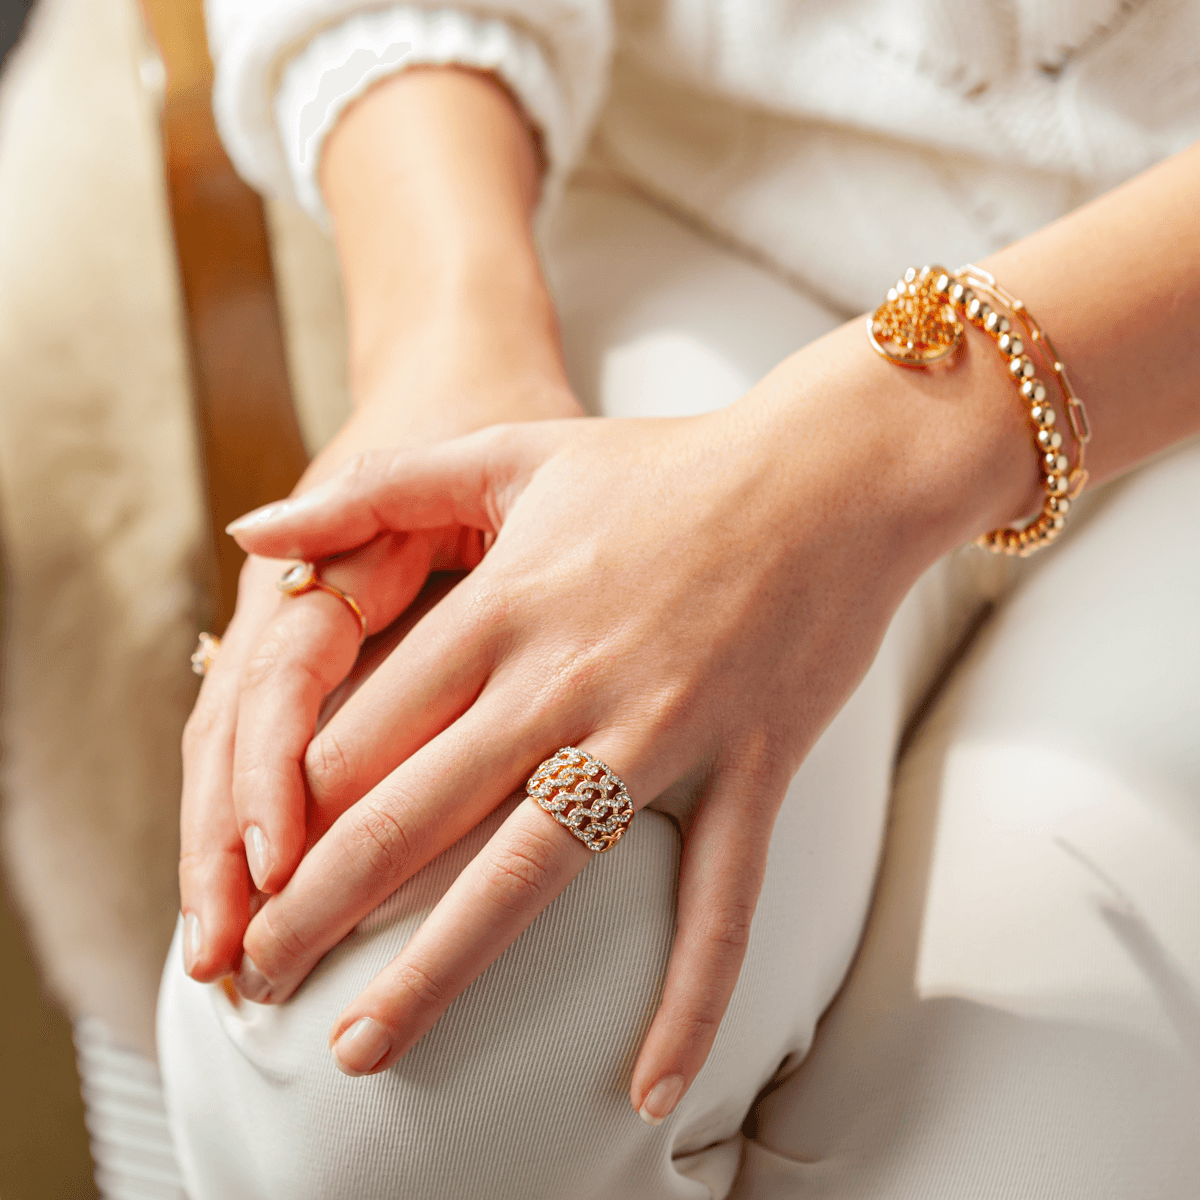 The Role of Jewellery in Defining Your Personal Style